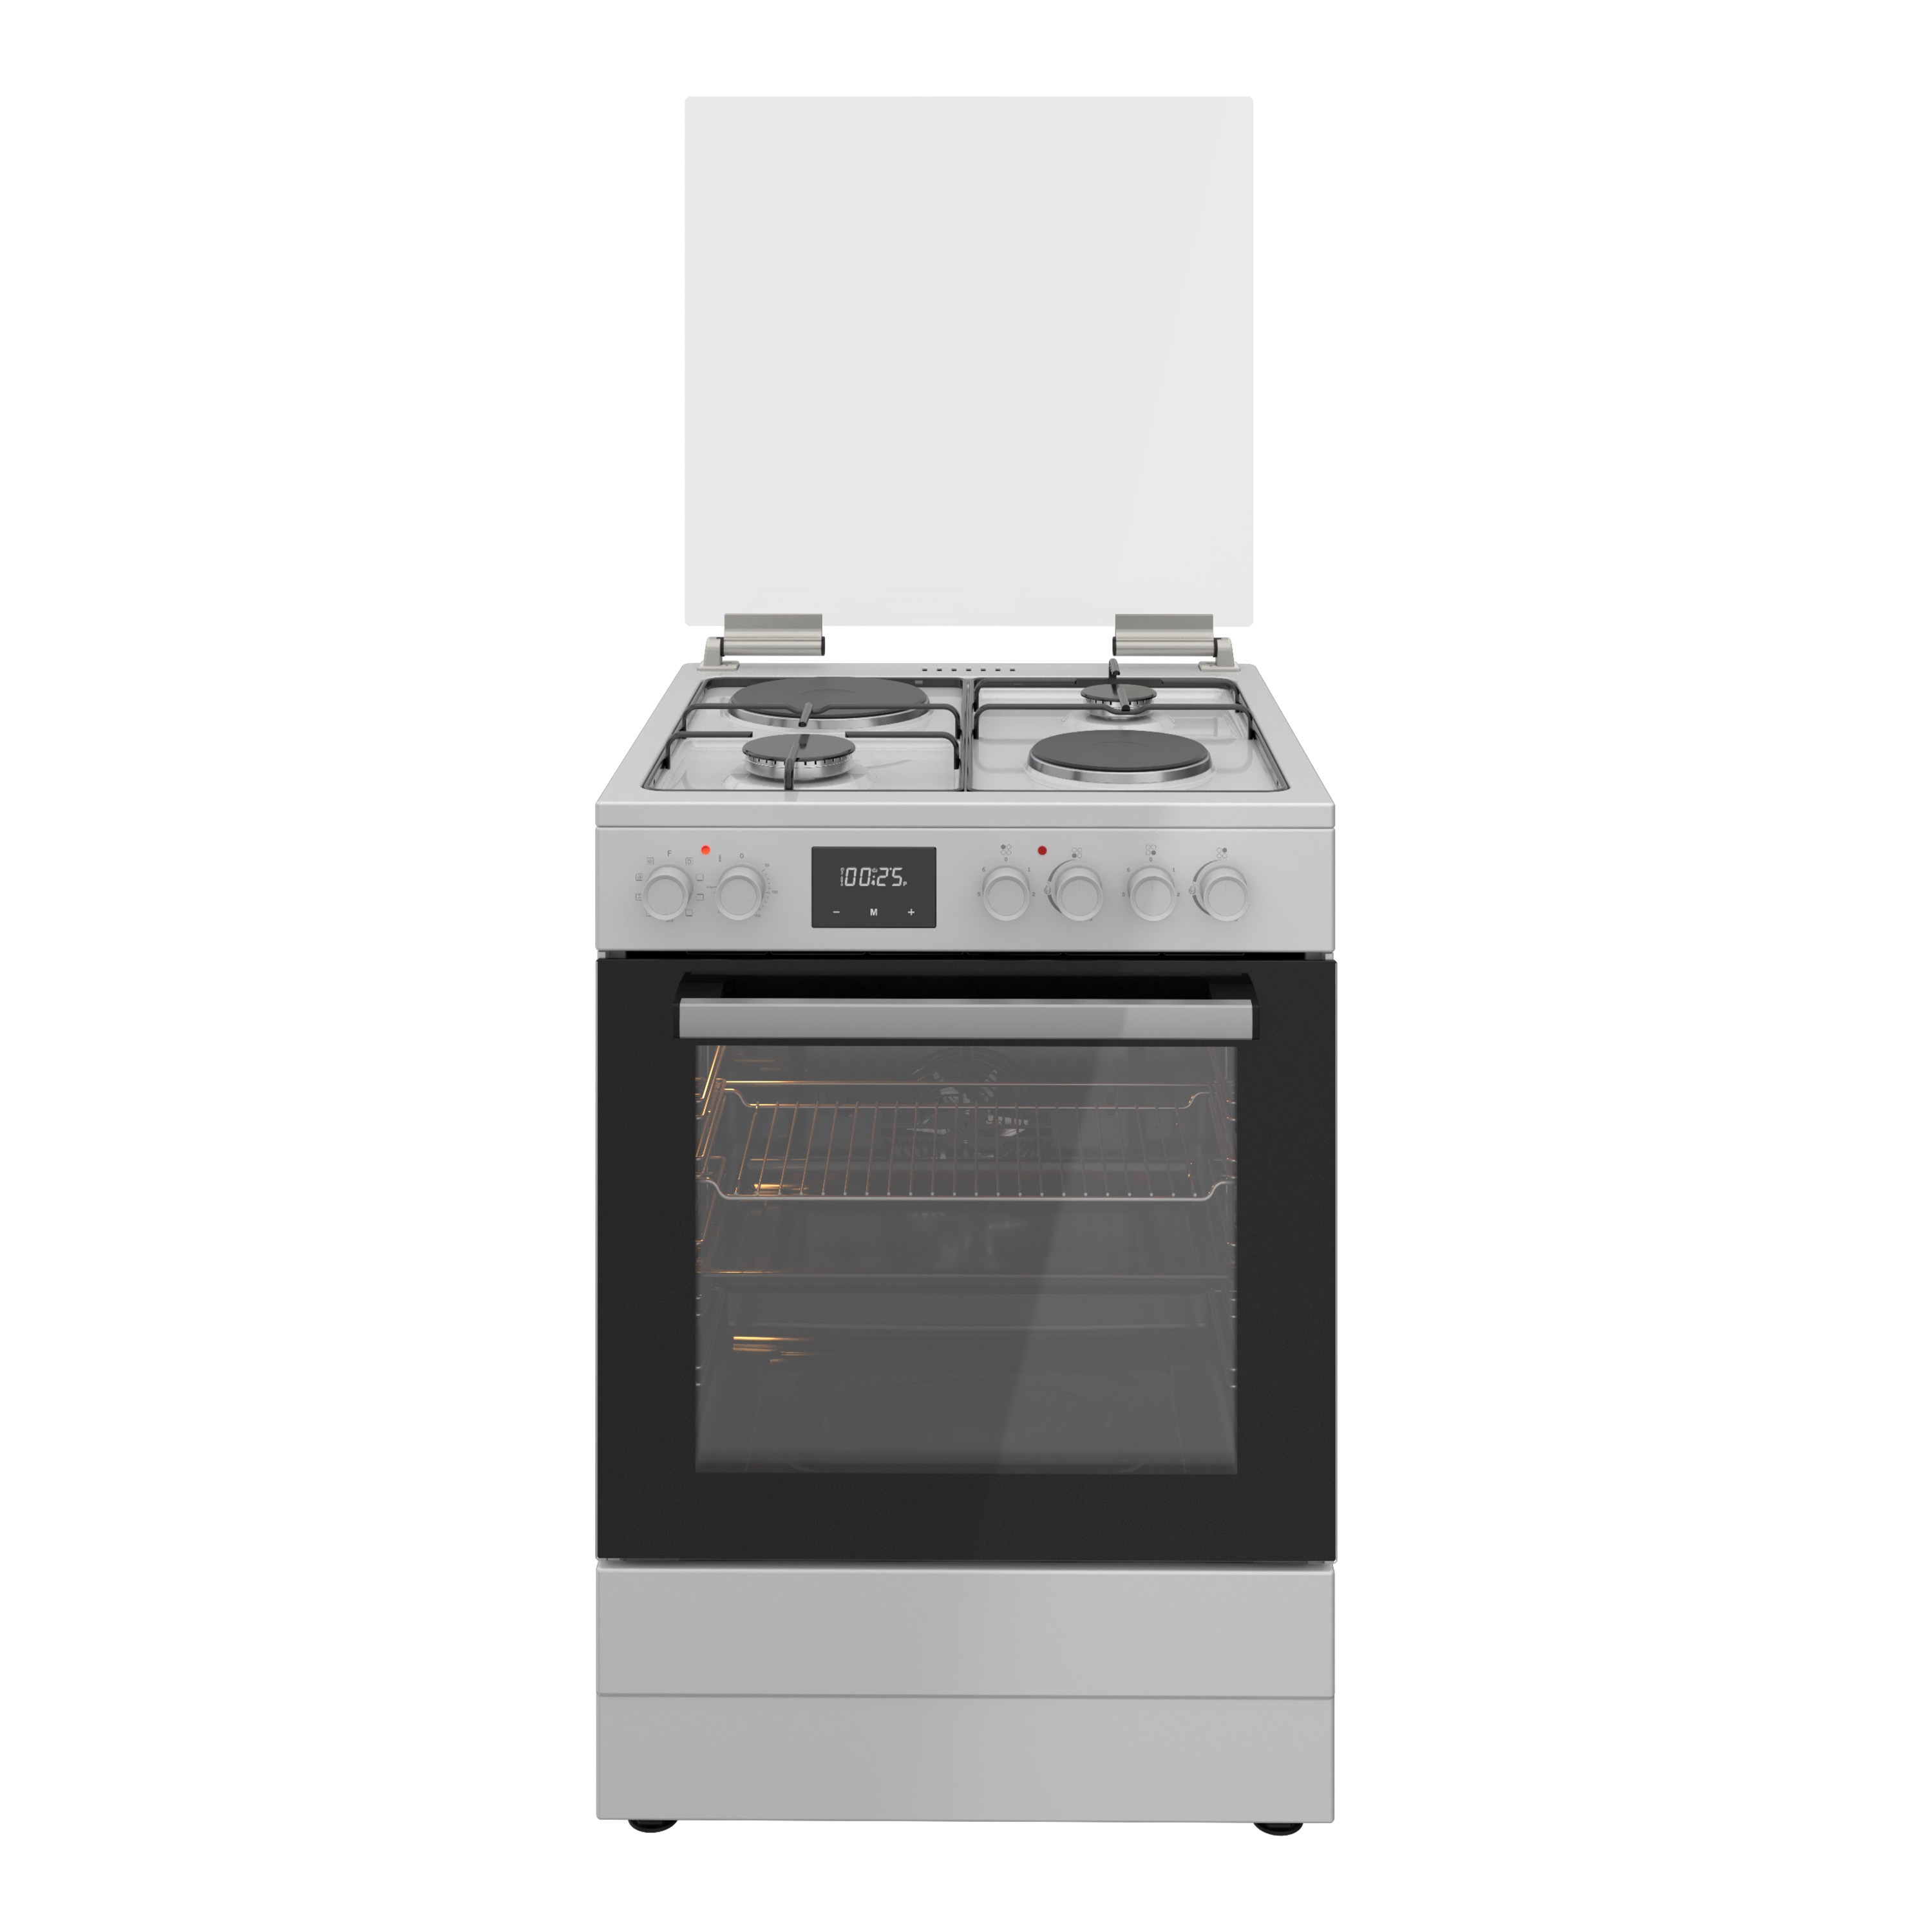 Gas Freestanding Cookers - Tectone - Home Appliances